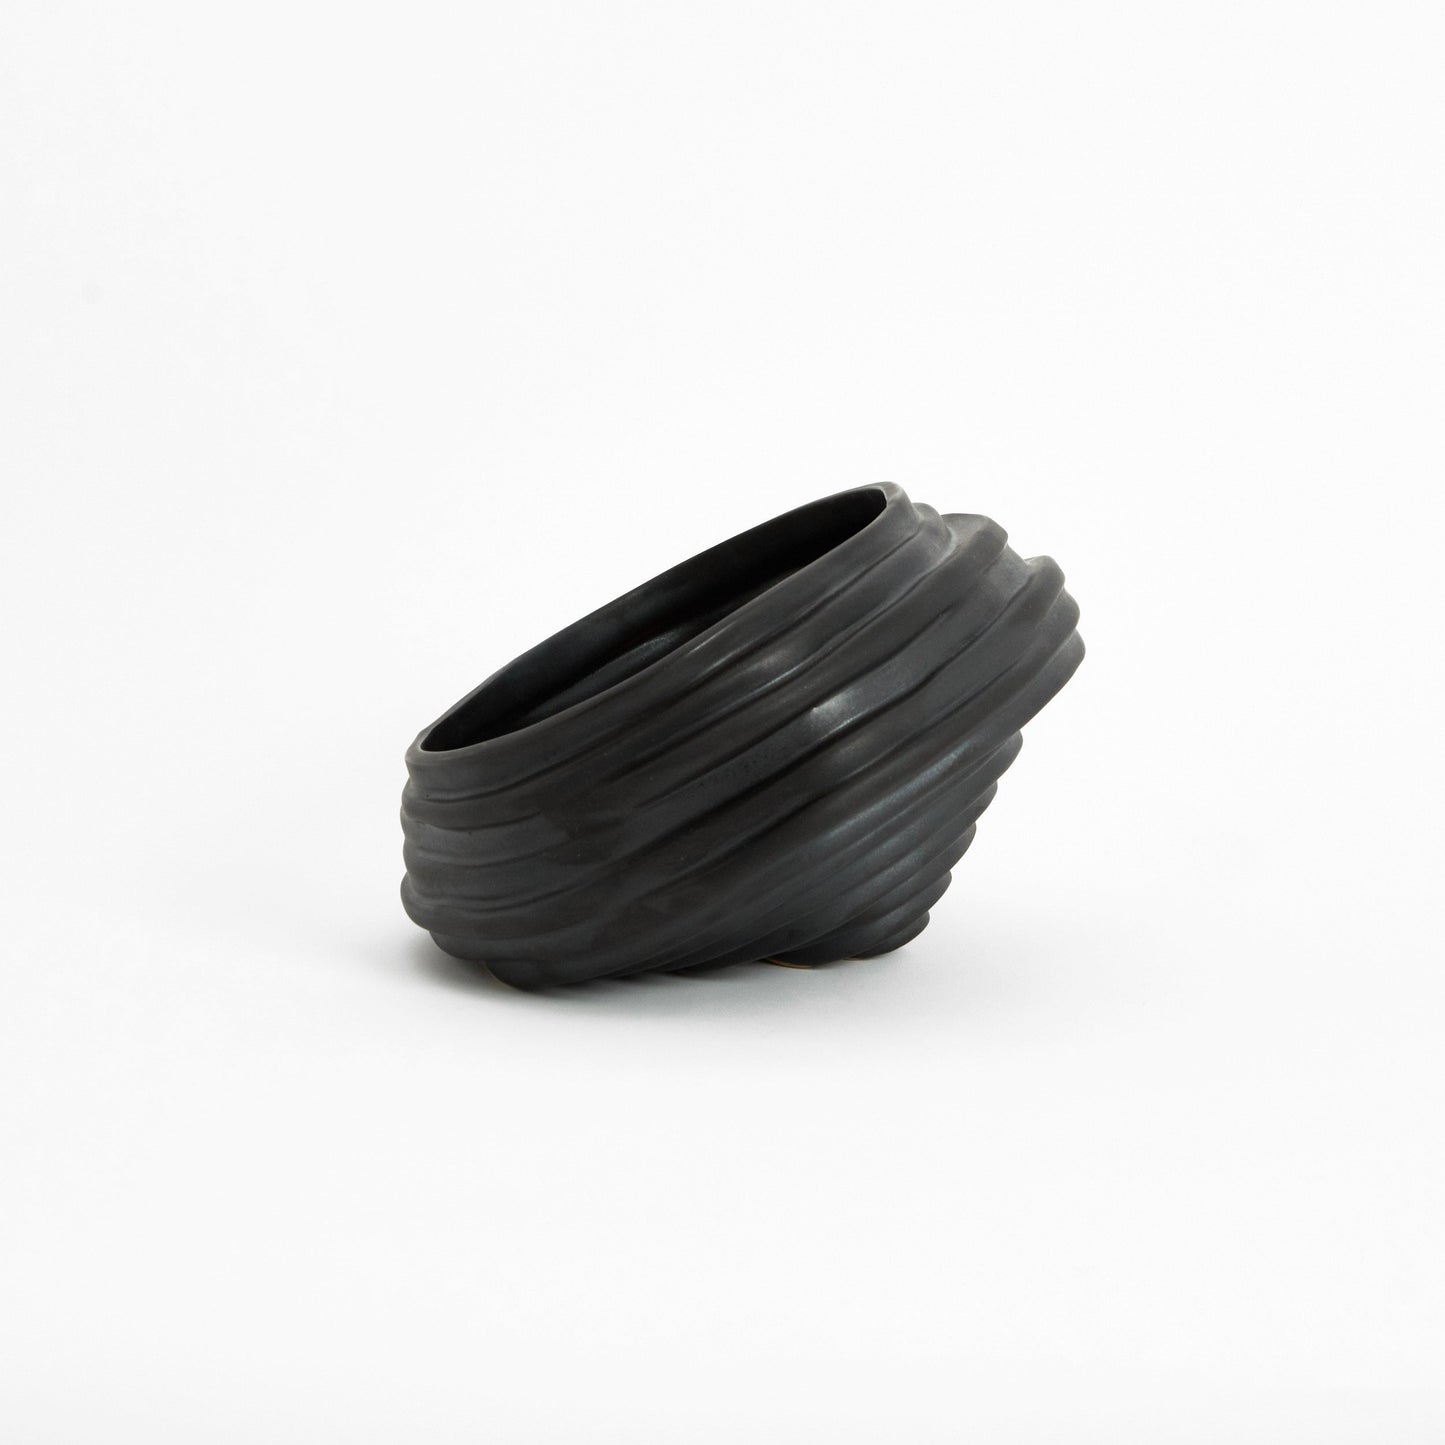 Alfonso Fruit Bowl in Graphite